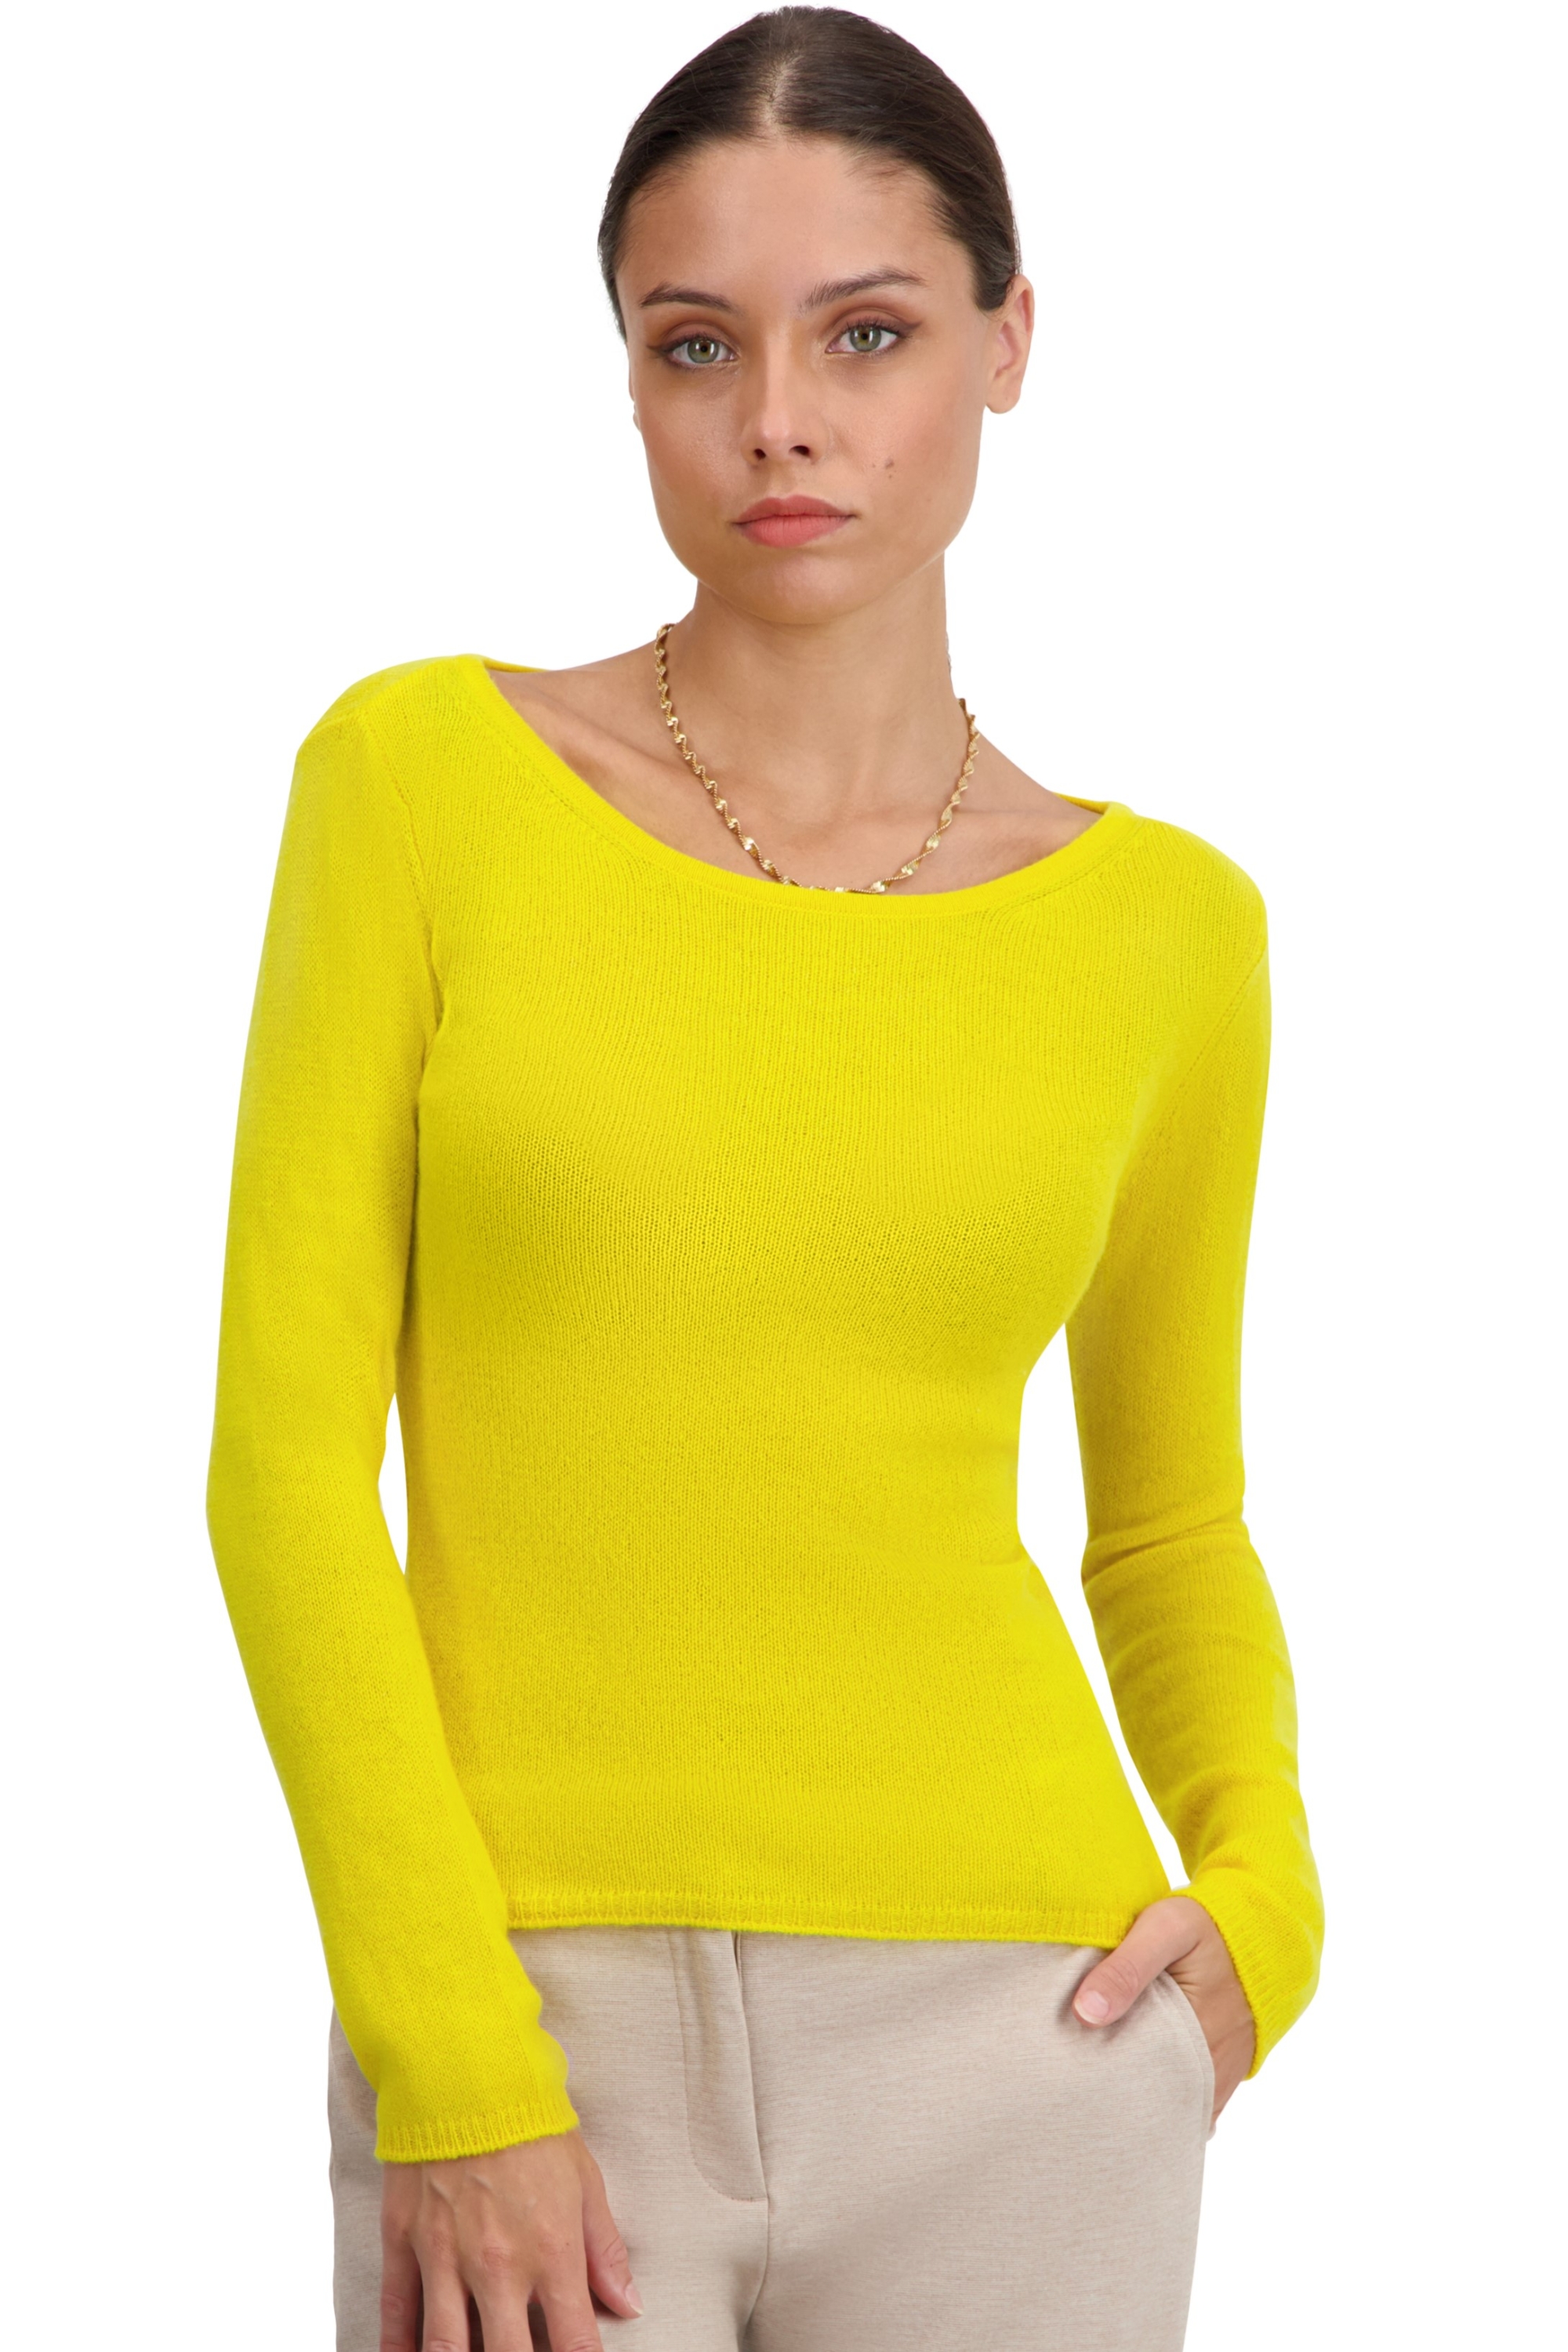 Cashmere ladies basic sweaters at low prices caleen cyber yellow 4xl